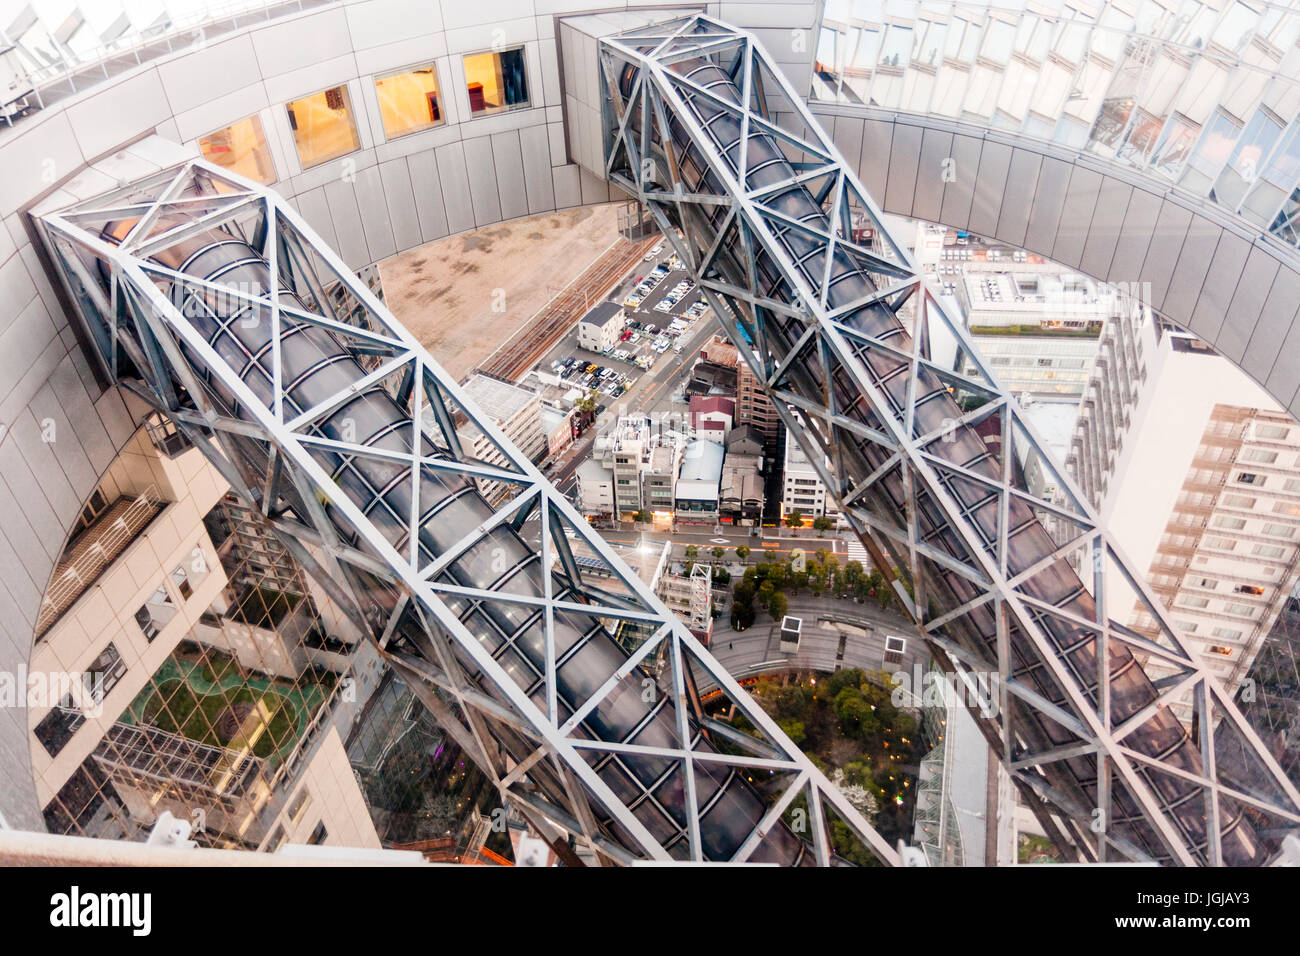 Japan, Osaka. Umeda Sky Building, view from top. The two metal framework enclosed glass escalator shafts that traverse from the 35th to the 39th floor. Stock Photo